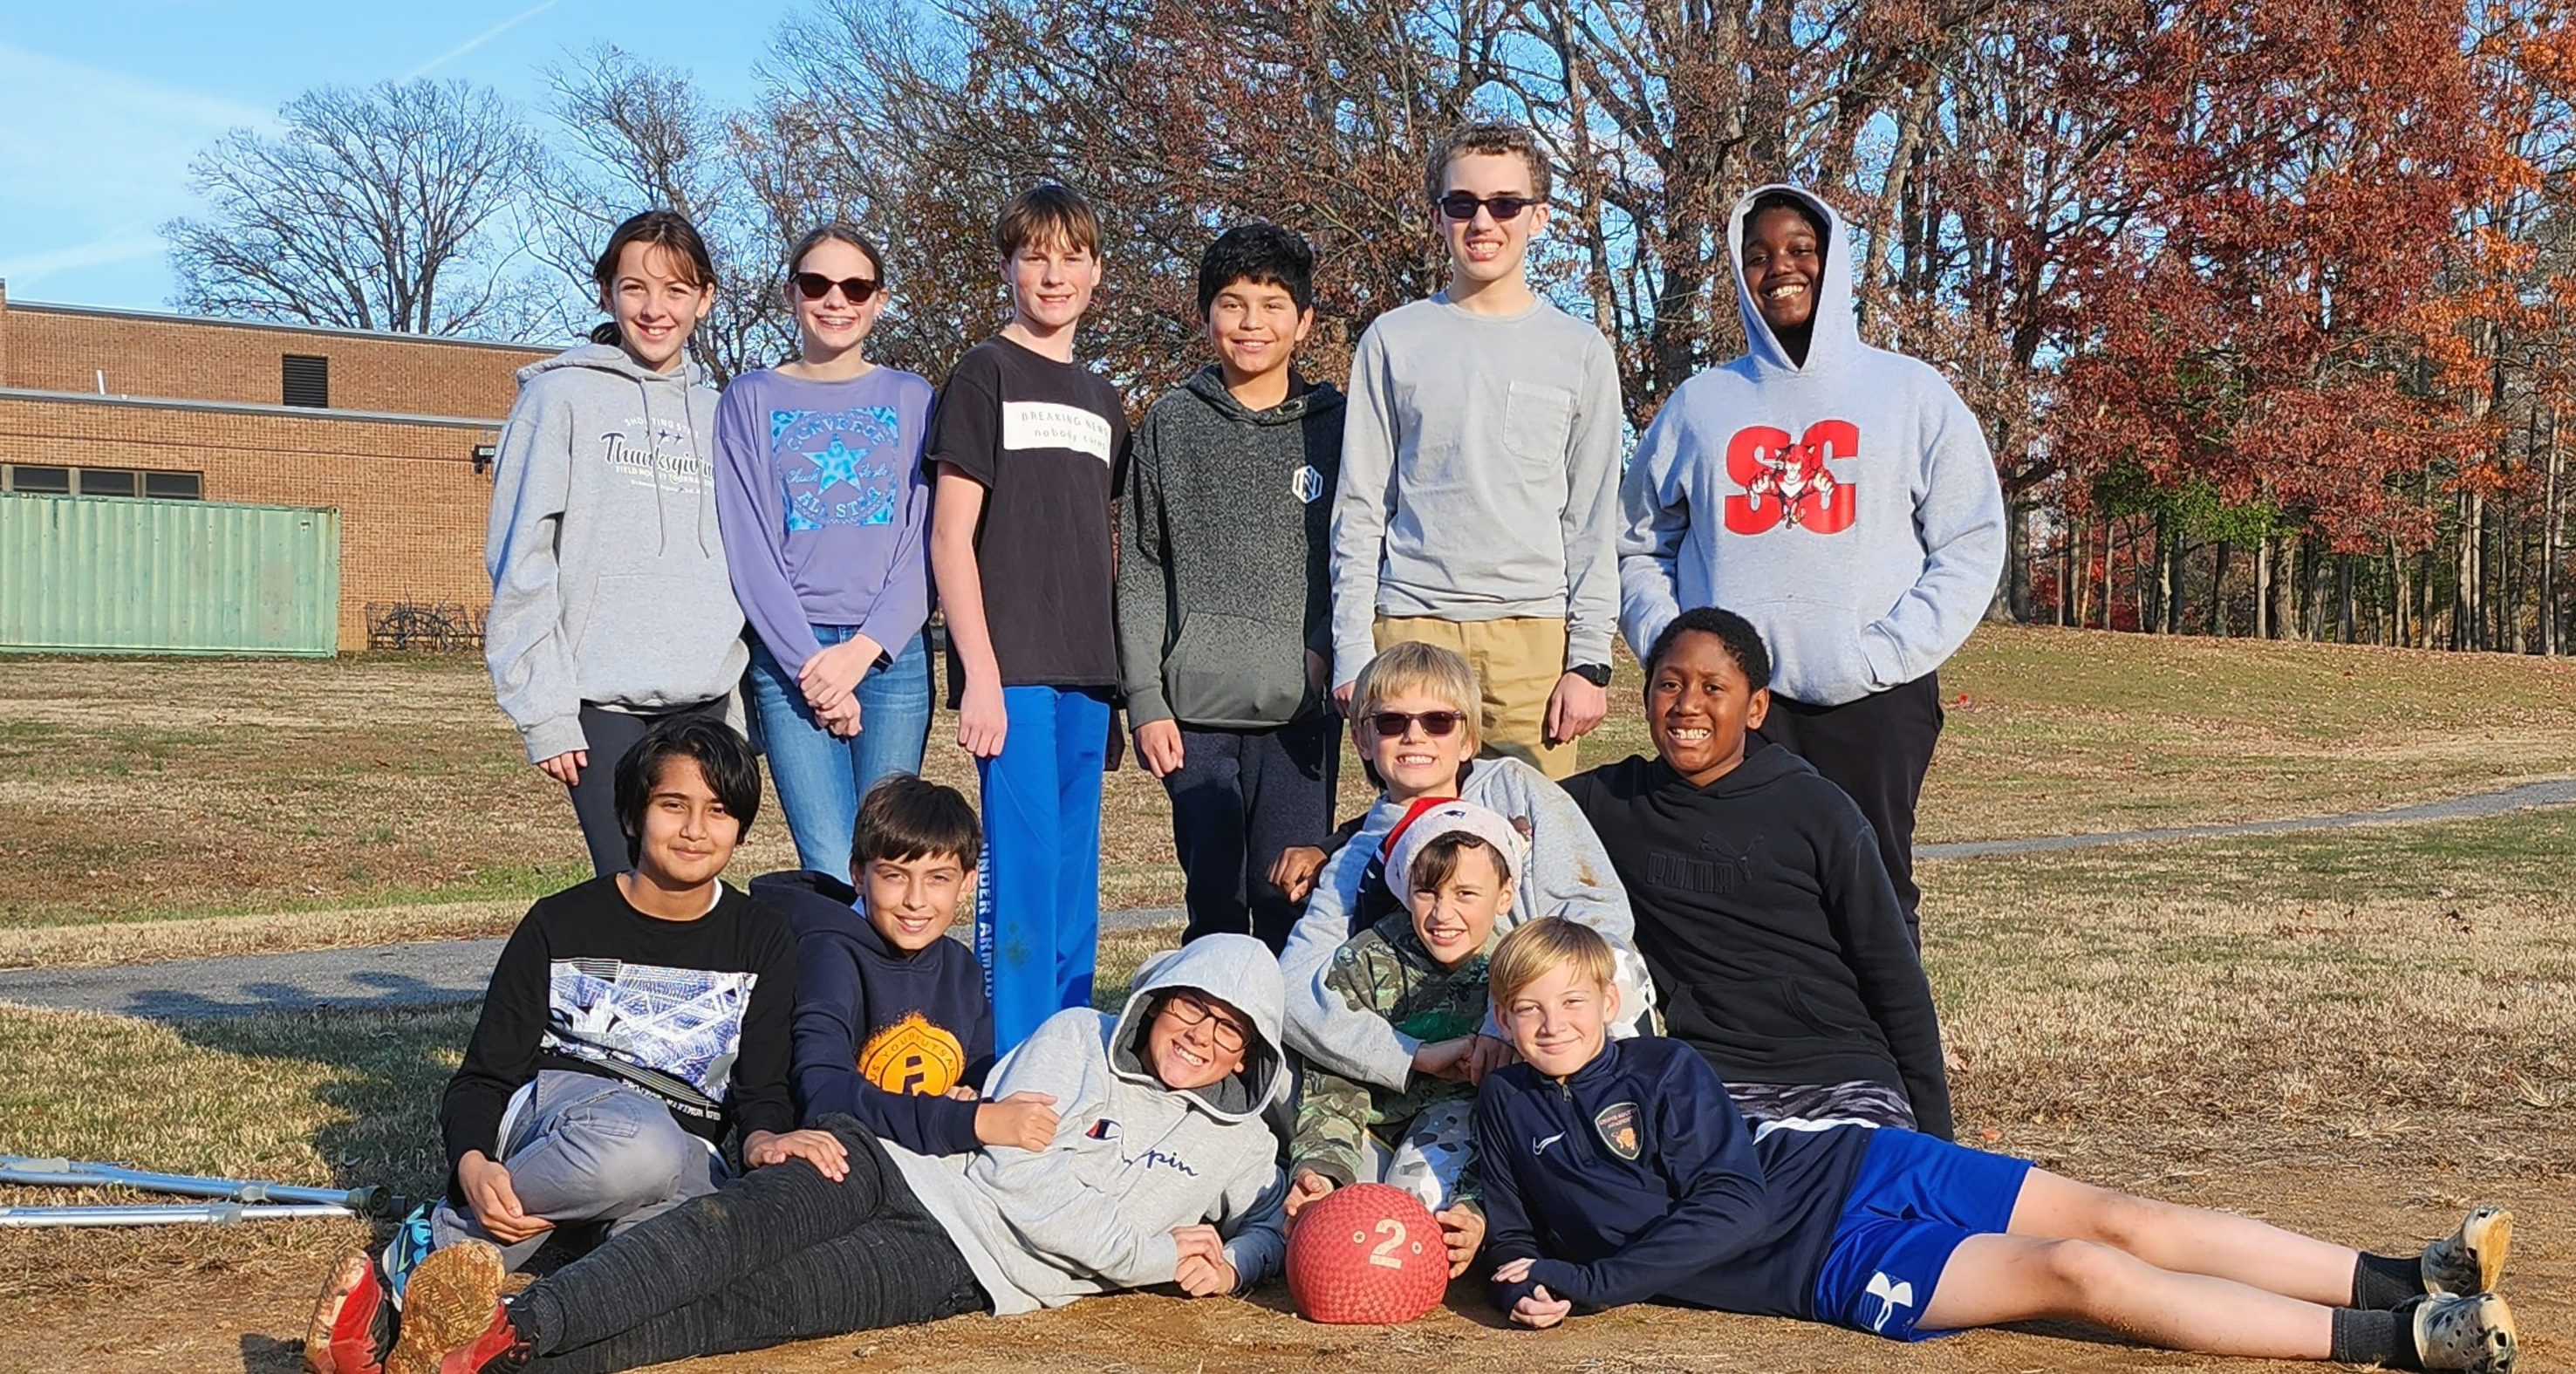 Students pose for a photo after playing kickball